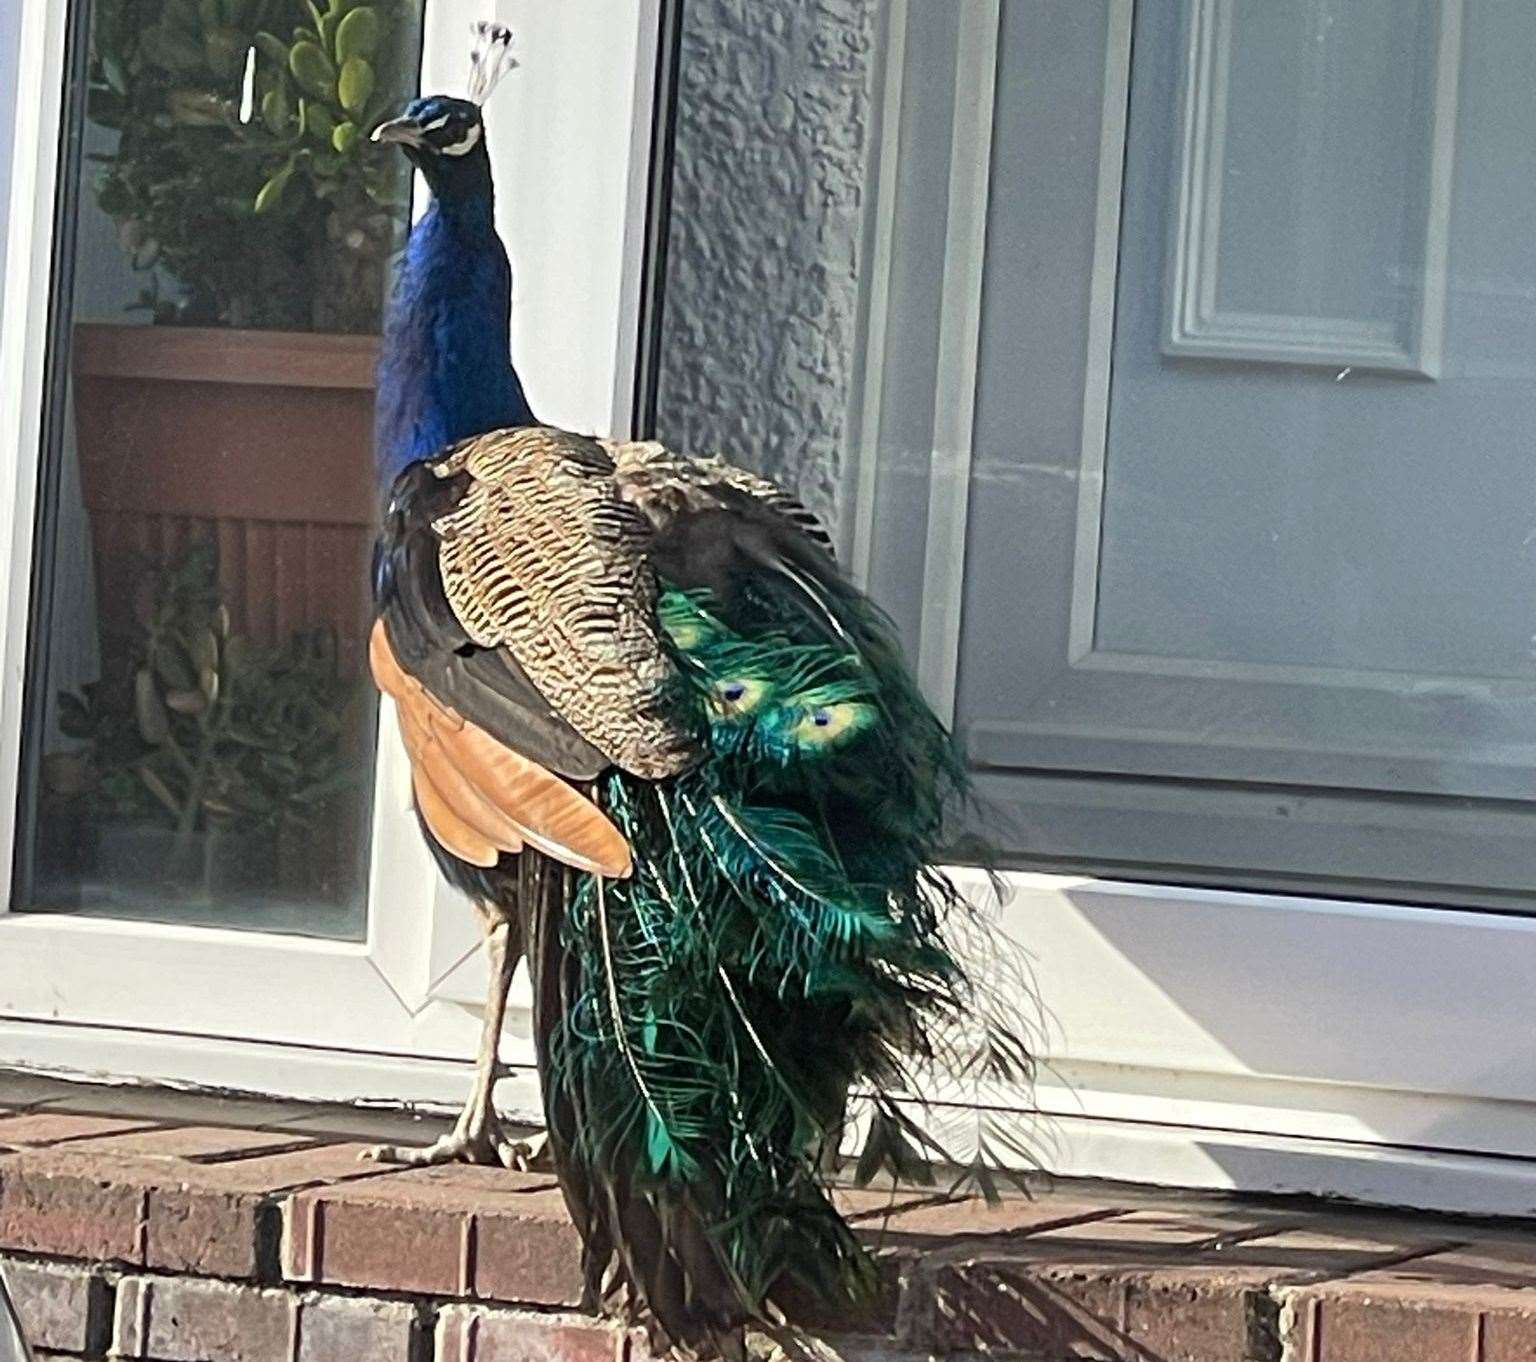 The peacock on the loose in Gravesend in November. Picture: Martin Jordan